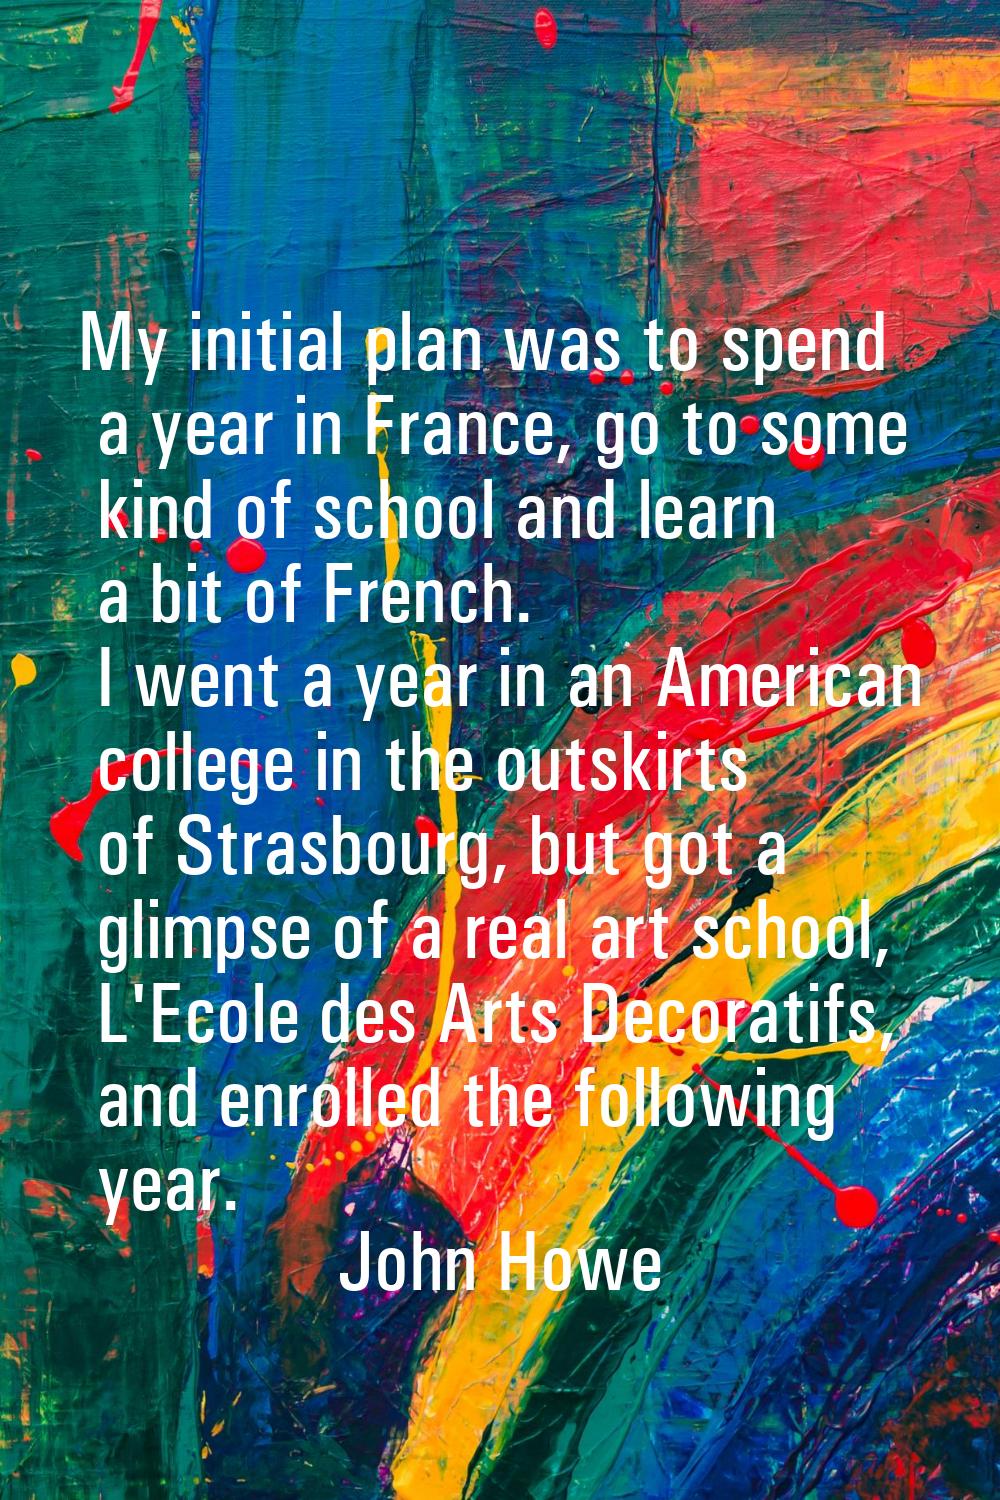 My initial plan was to spend a year in France, go to some kind of school and learn a bit of French.